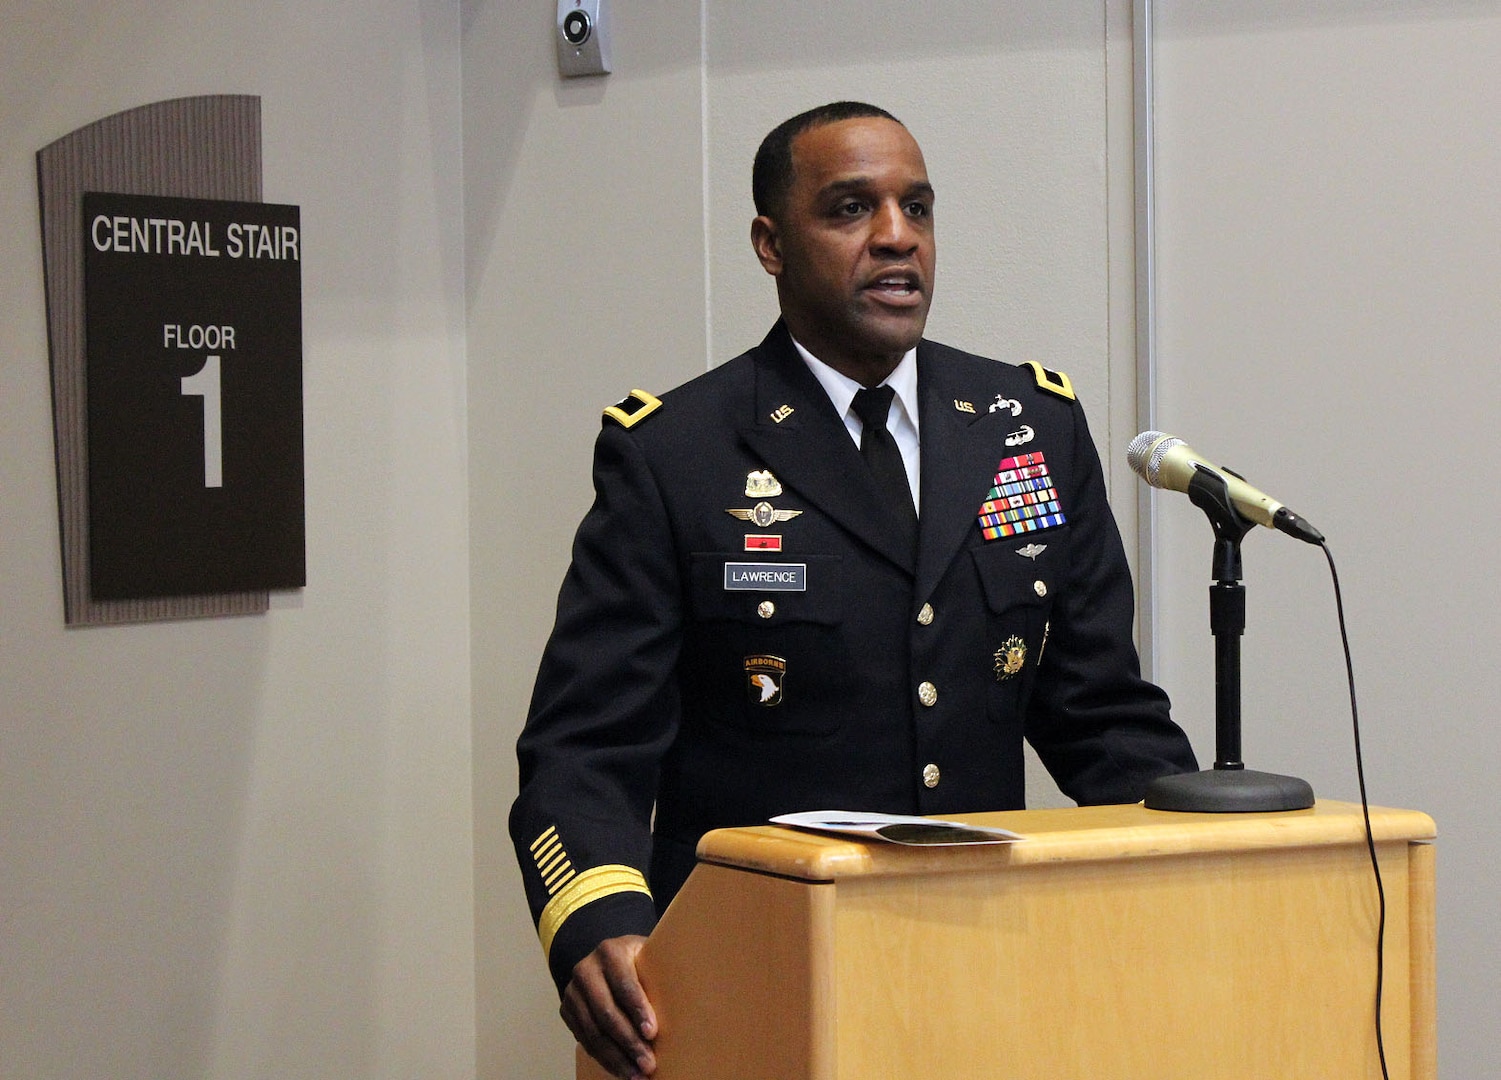 Army Brig. Gen. Gavin Lawrence, commander of Defense Logistics Agency Troop Support, addresses the attendees during a ribbon cutting ceremony for its new headquarters building in Philadelphia on Dec. 10, 2019. The 108,500-square-foot, four-story building was completed in October, and is Leadership in Energy and Environmental Design certified. (Photo by Nancy Benecki)